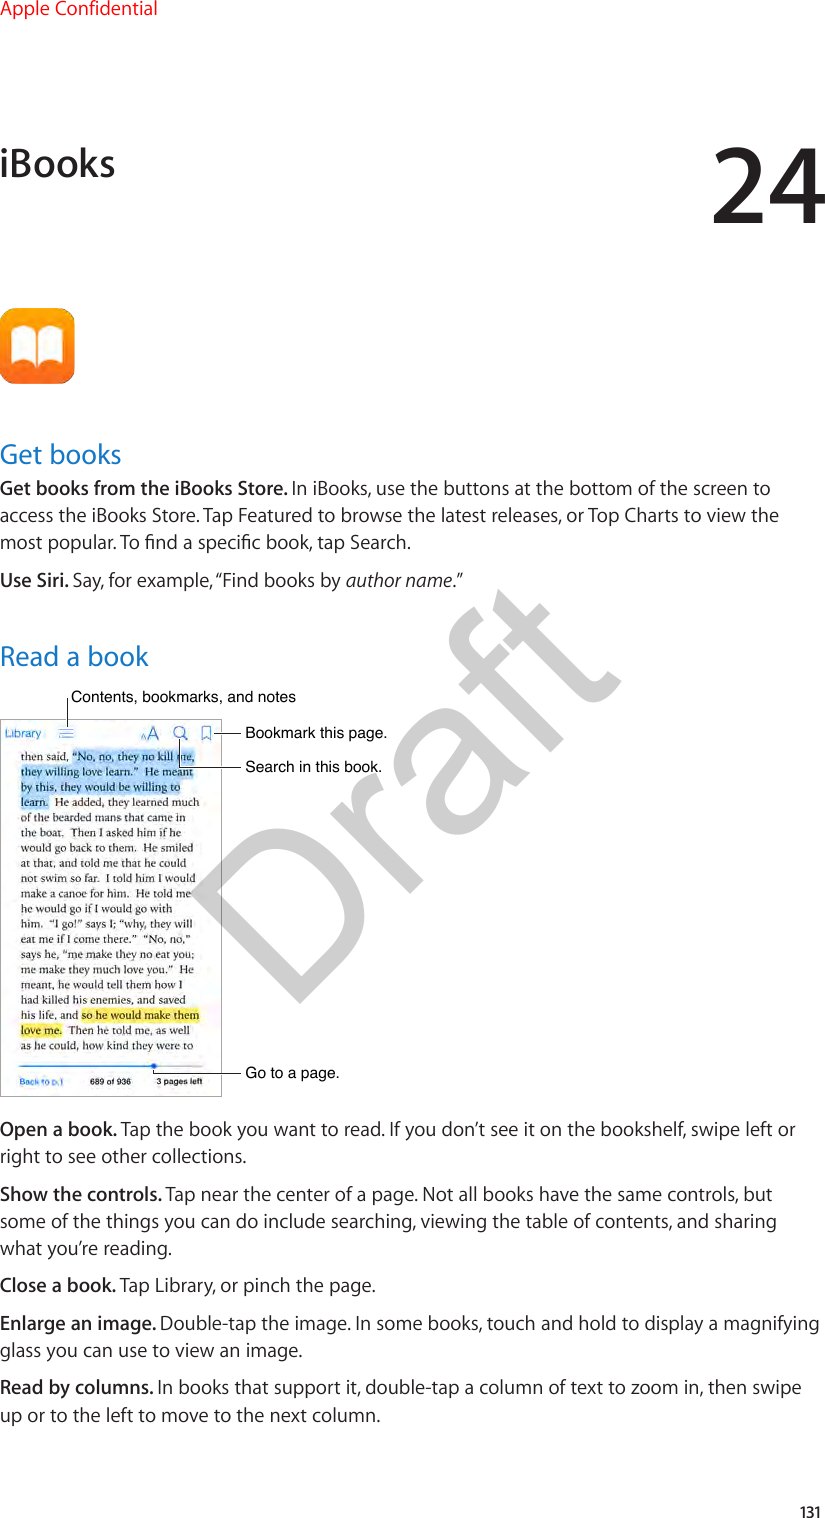 24131Get booksGet books from the iBooks Store. In iBooks, use the buttons at the bottom of the screen to access the iBooks Store. Tap Featured to browse the latest releases, or Top Charts to view the most popular. To nd a specic book, tap Search.Use Siri. Say, for example, “Find books by author name.”Read a bookGo to a page.Go to a page.Bookmark this page.Bookmark this page.Contents, bookmarks, and notesContents, bookmarks, and notesSearch in this book.Search in this book.Open a book. Tap the book you want to read. If you don’t see it on the bookshelf, swipe left or right to see other collections.Show the controls. Tap near the center of a page. Not all books have the same controls, but some of the things you can do include searching, viewing the table of contents, and sharing what you’re reading.Close a book. Tap Library, or pinch the page.Enlarge an image. Double-tap the image. In some books, touch and hold to display a magnifying glass you can use to view an image.Read by columns. In books that support it, double-tap a column of text to zoom in, then swipe up or to the left to move to the next column.iBooksApple ConfidentialDraft